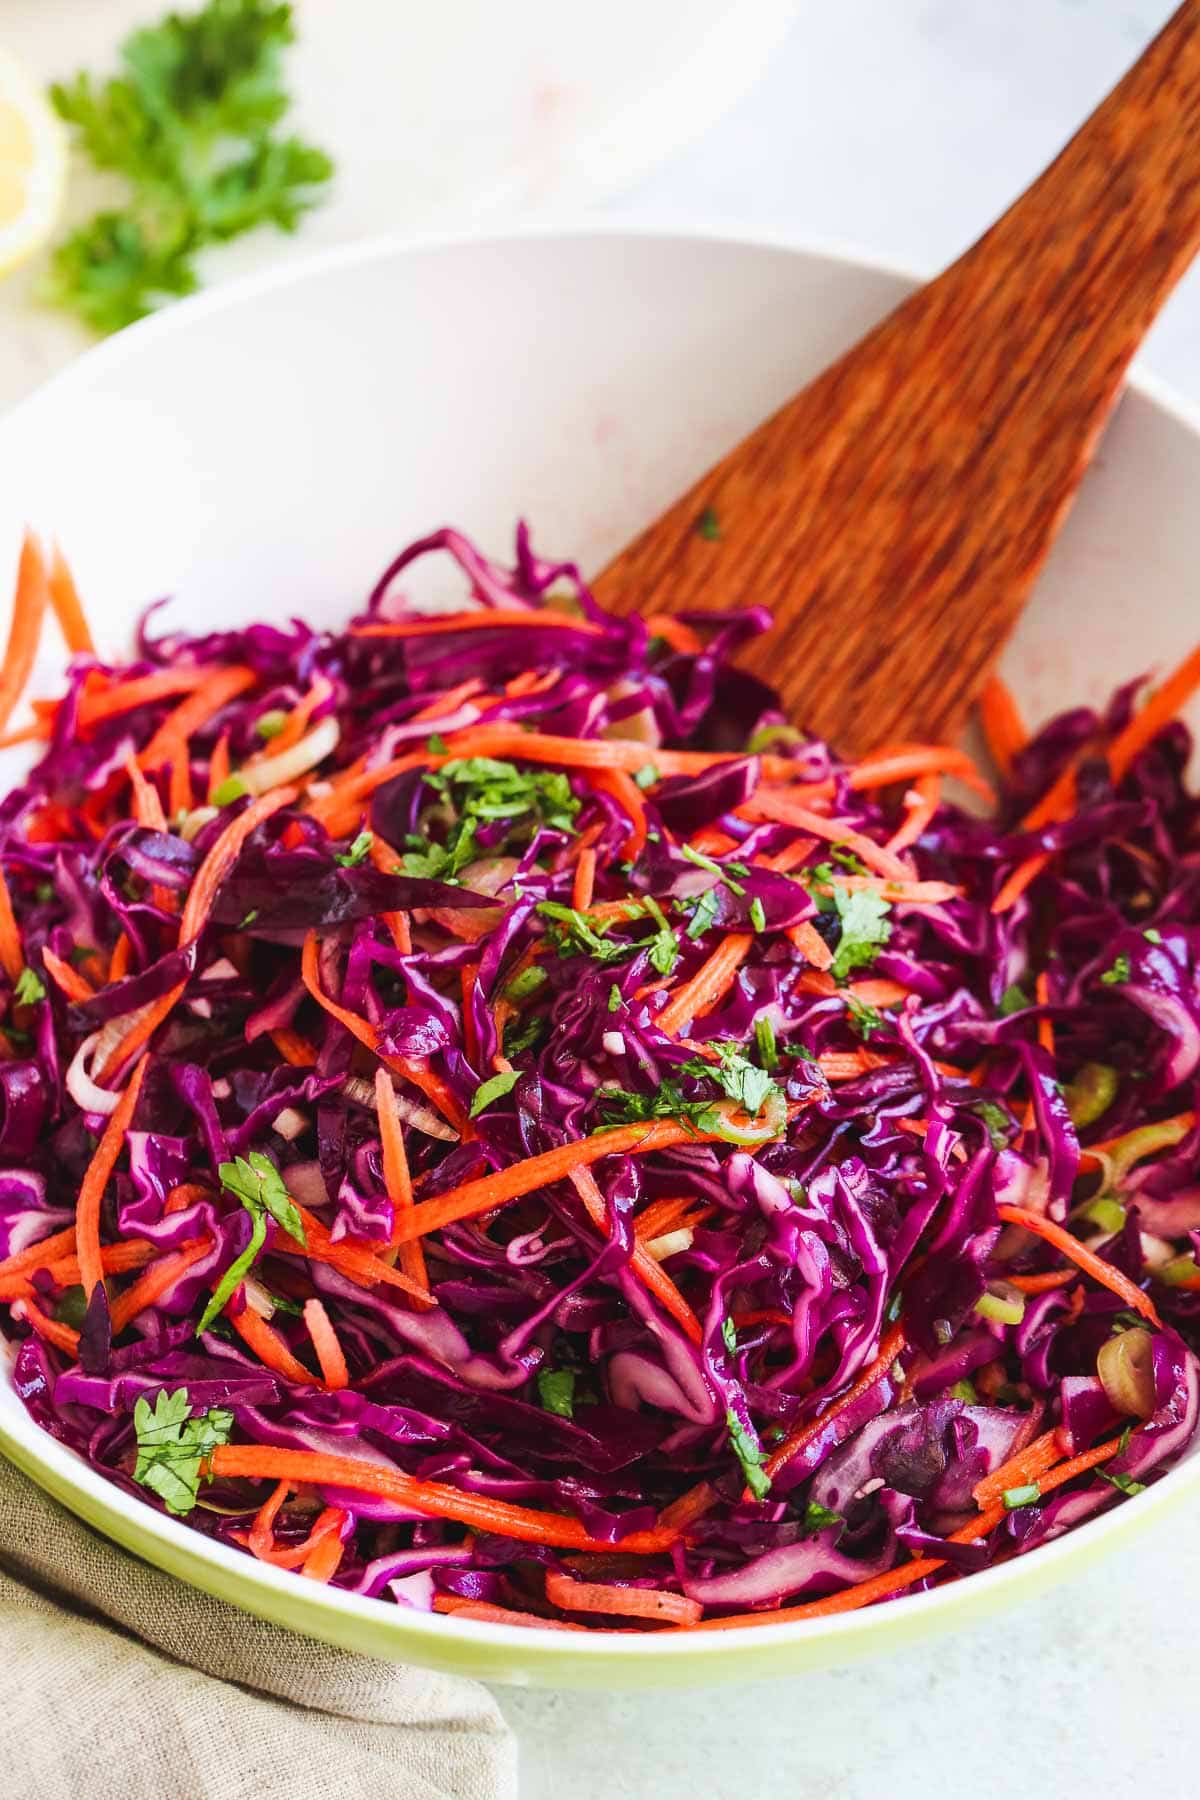 Healthy Red Cabbage Slaw Little Sunny Kitchen,How To Dispose Of Cooking Oil At Home